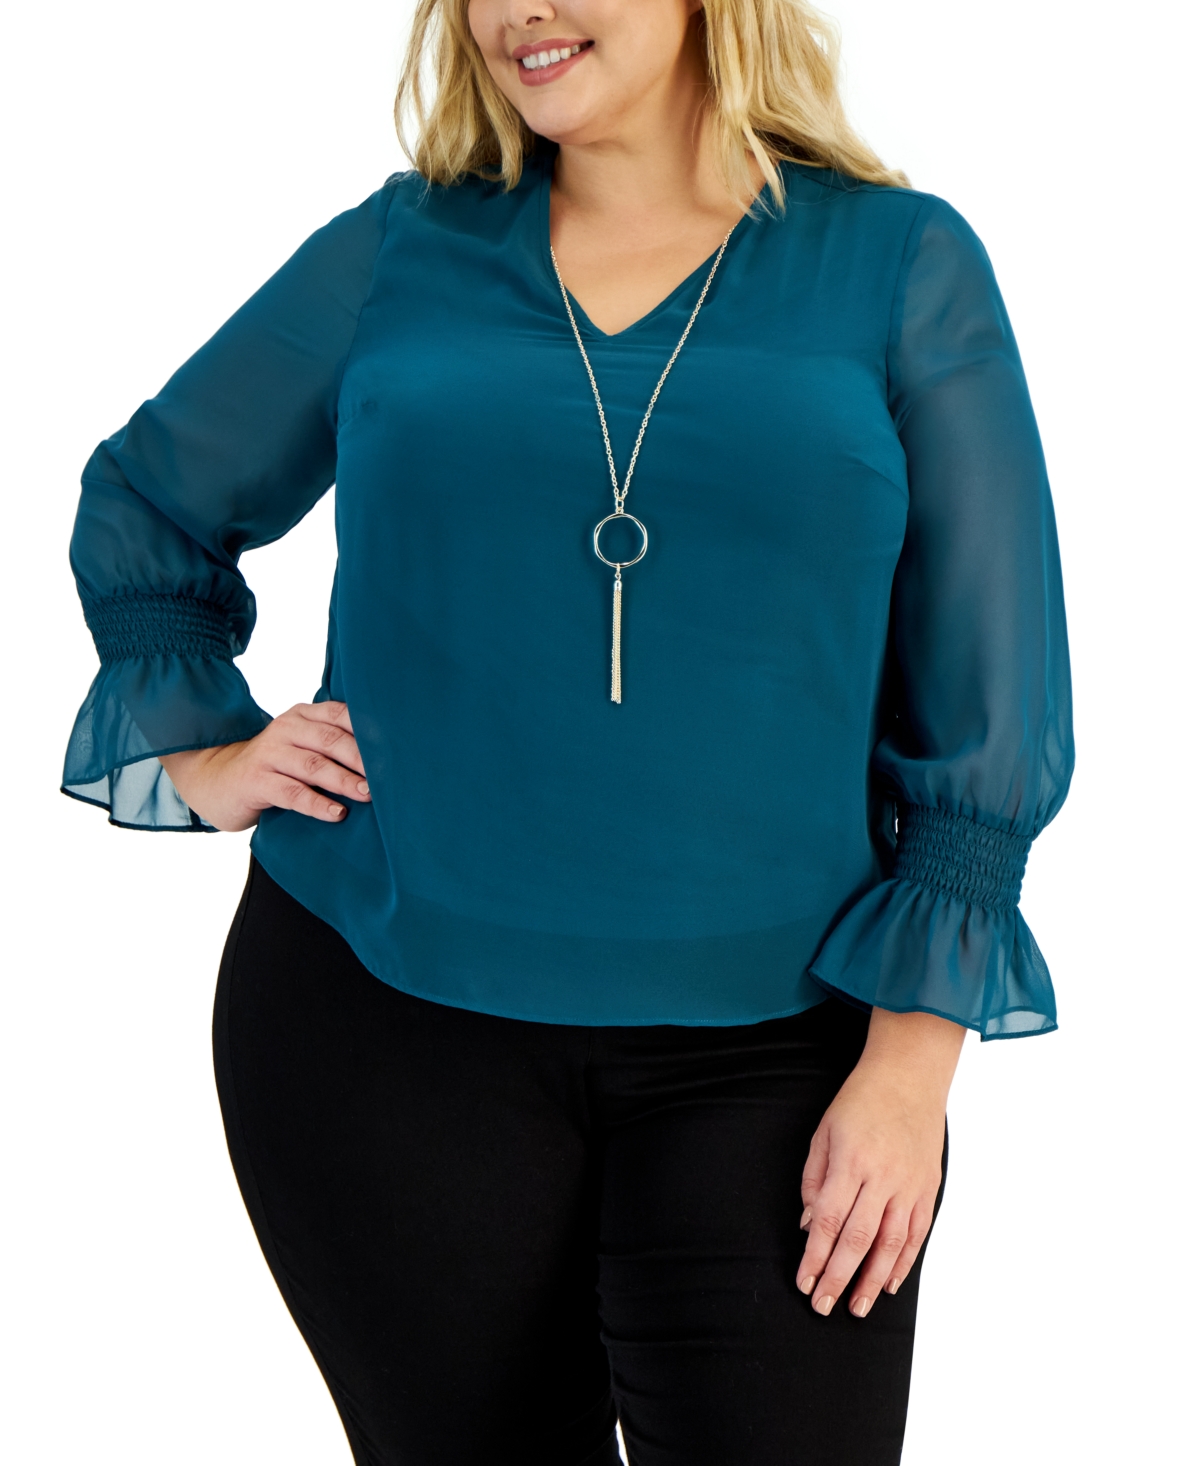 Plus Size Smocked-Sleeve Necklace Top, Created for Macy's - Teal Evergreen